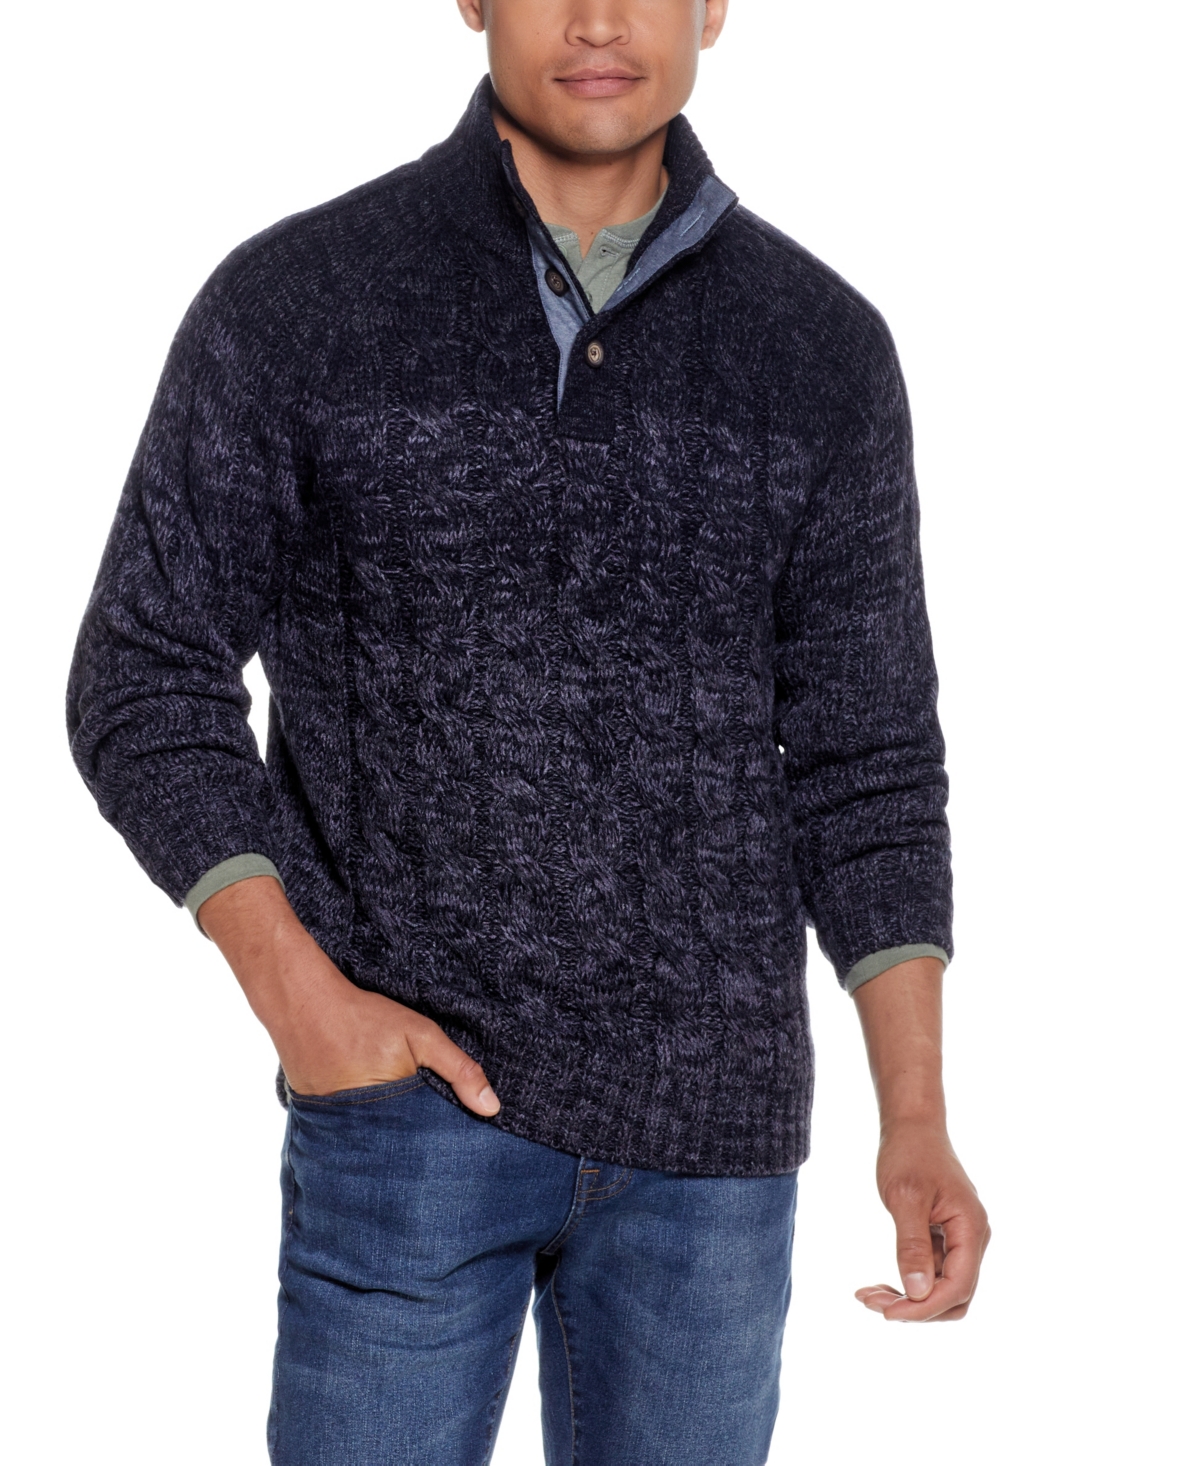 Men's Cable-Knit Ombre Button Mock Neck Sweater - Indigo Heather